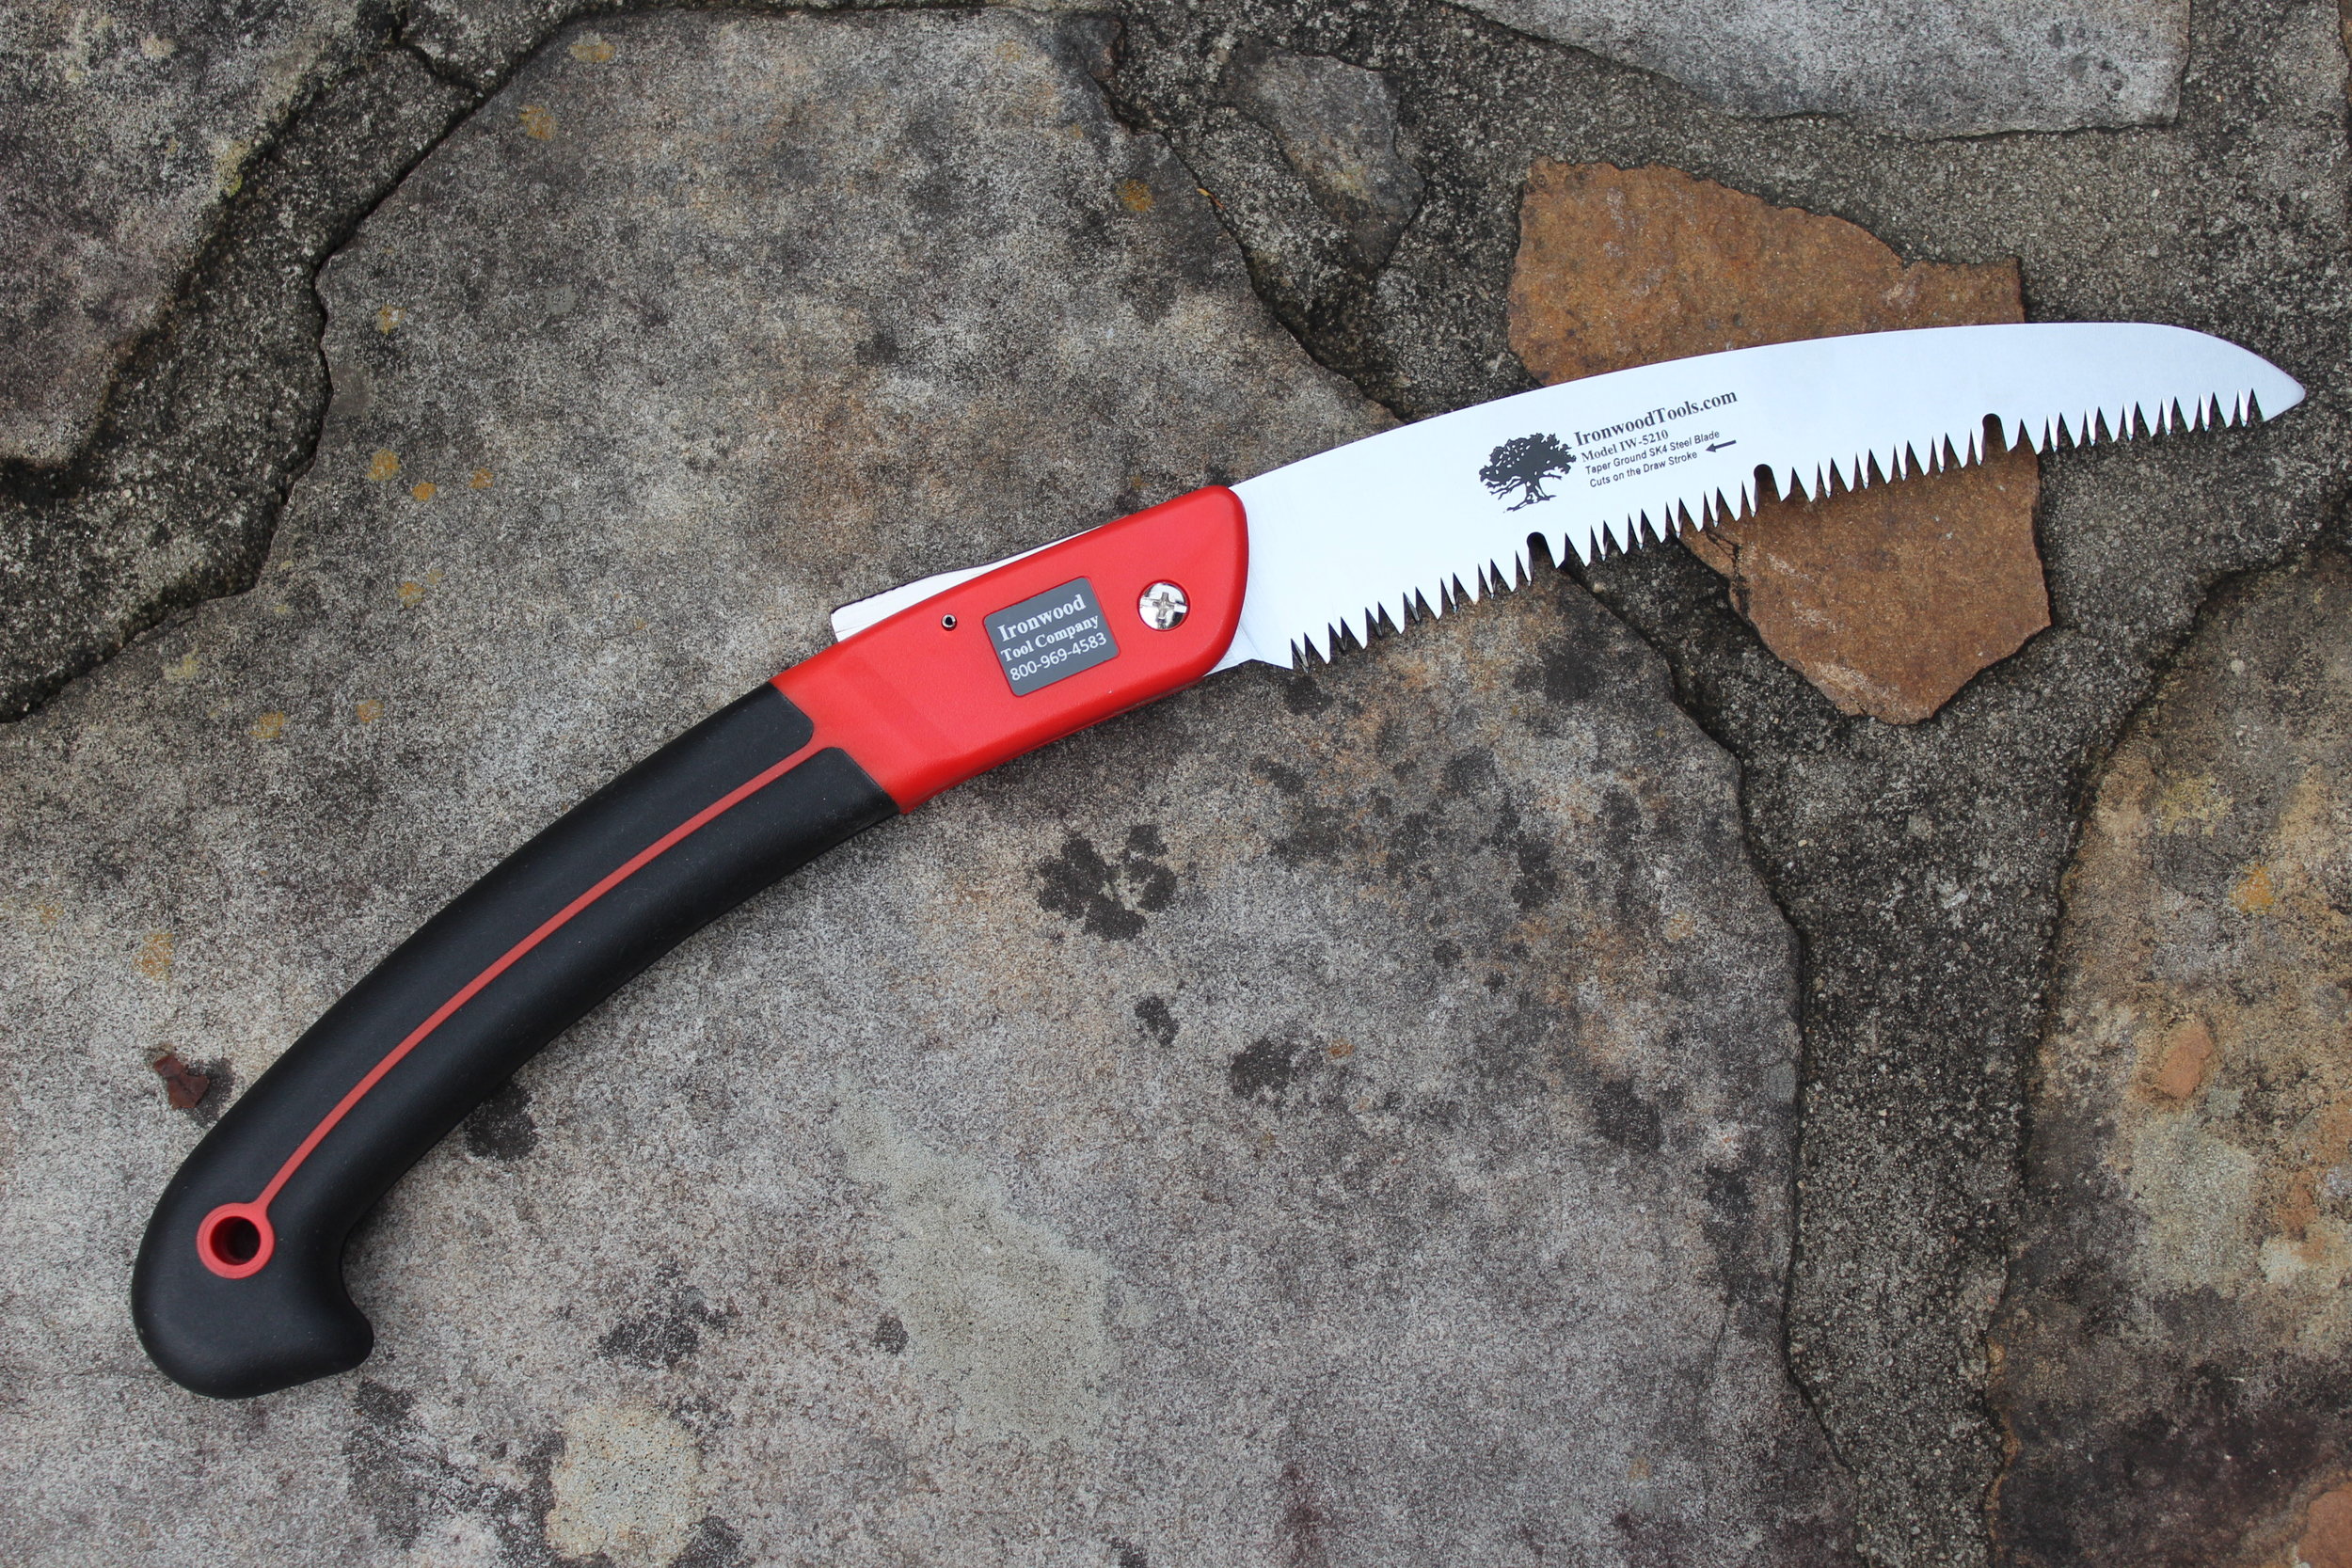 This Ironwood pruning saw has a slotted blade which helps with self-cleaning. Pitch and sap don't buildup as badly.&nbsp;